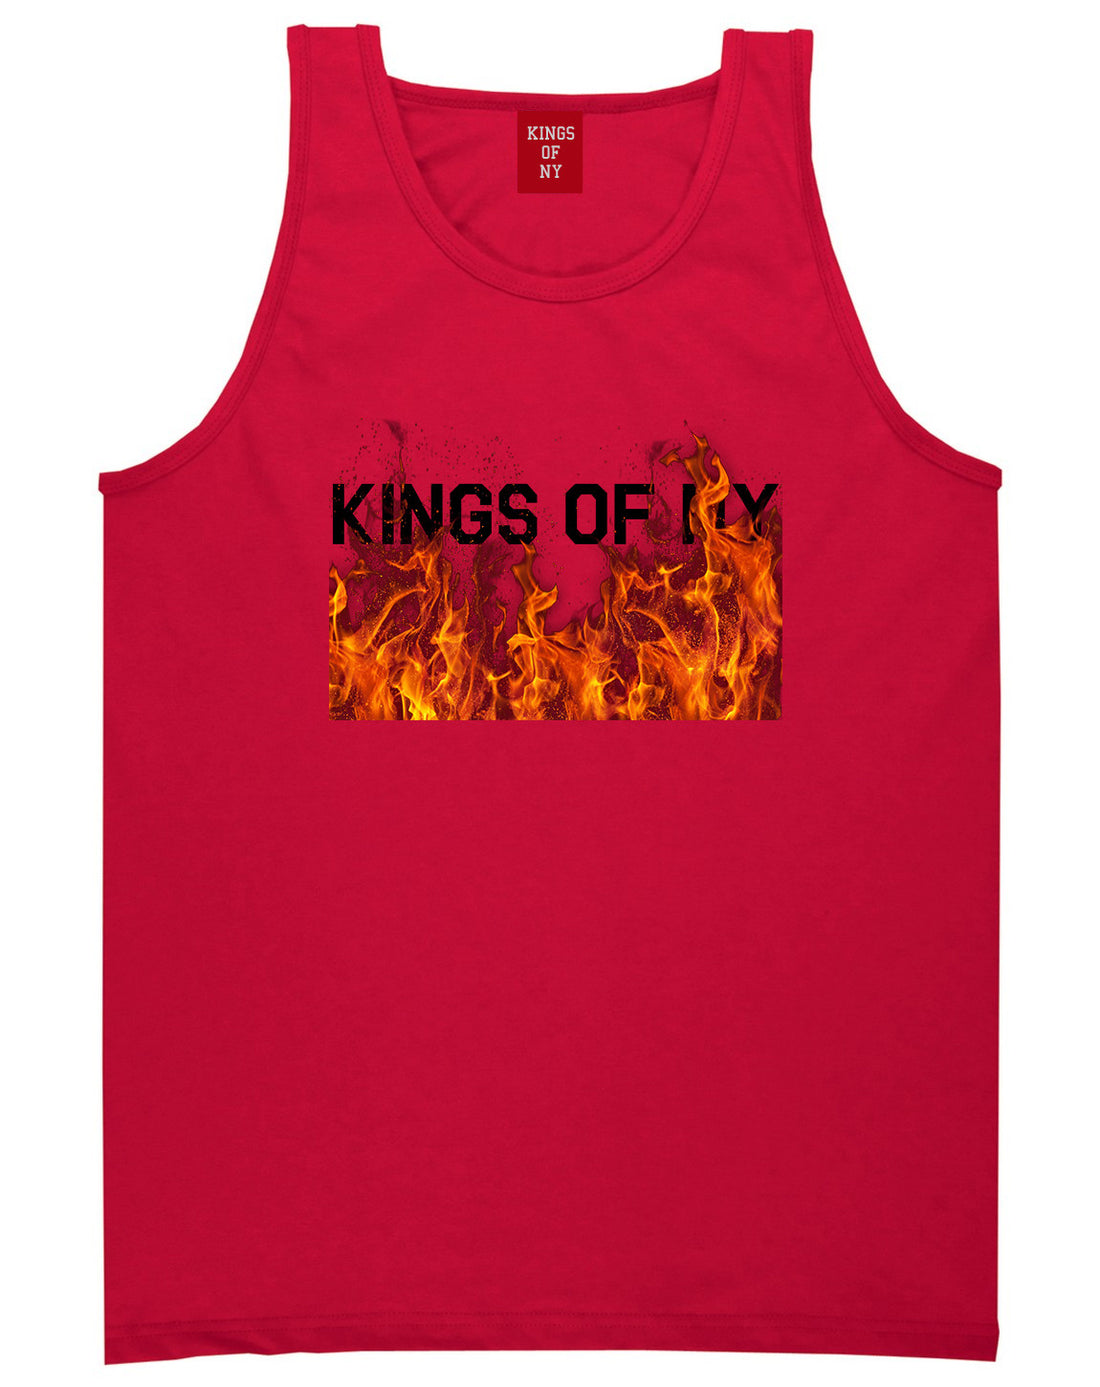 Rising From The Flames Tank Top in Red